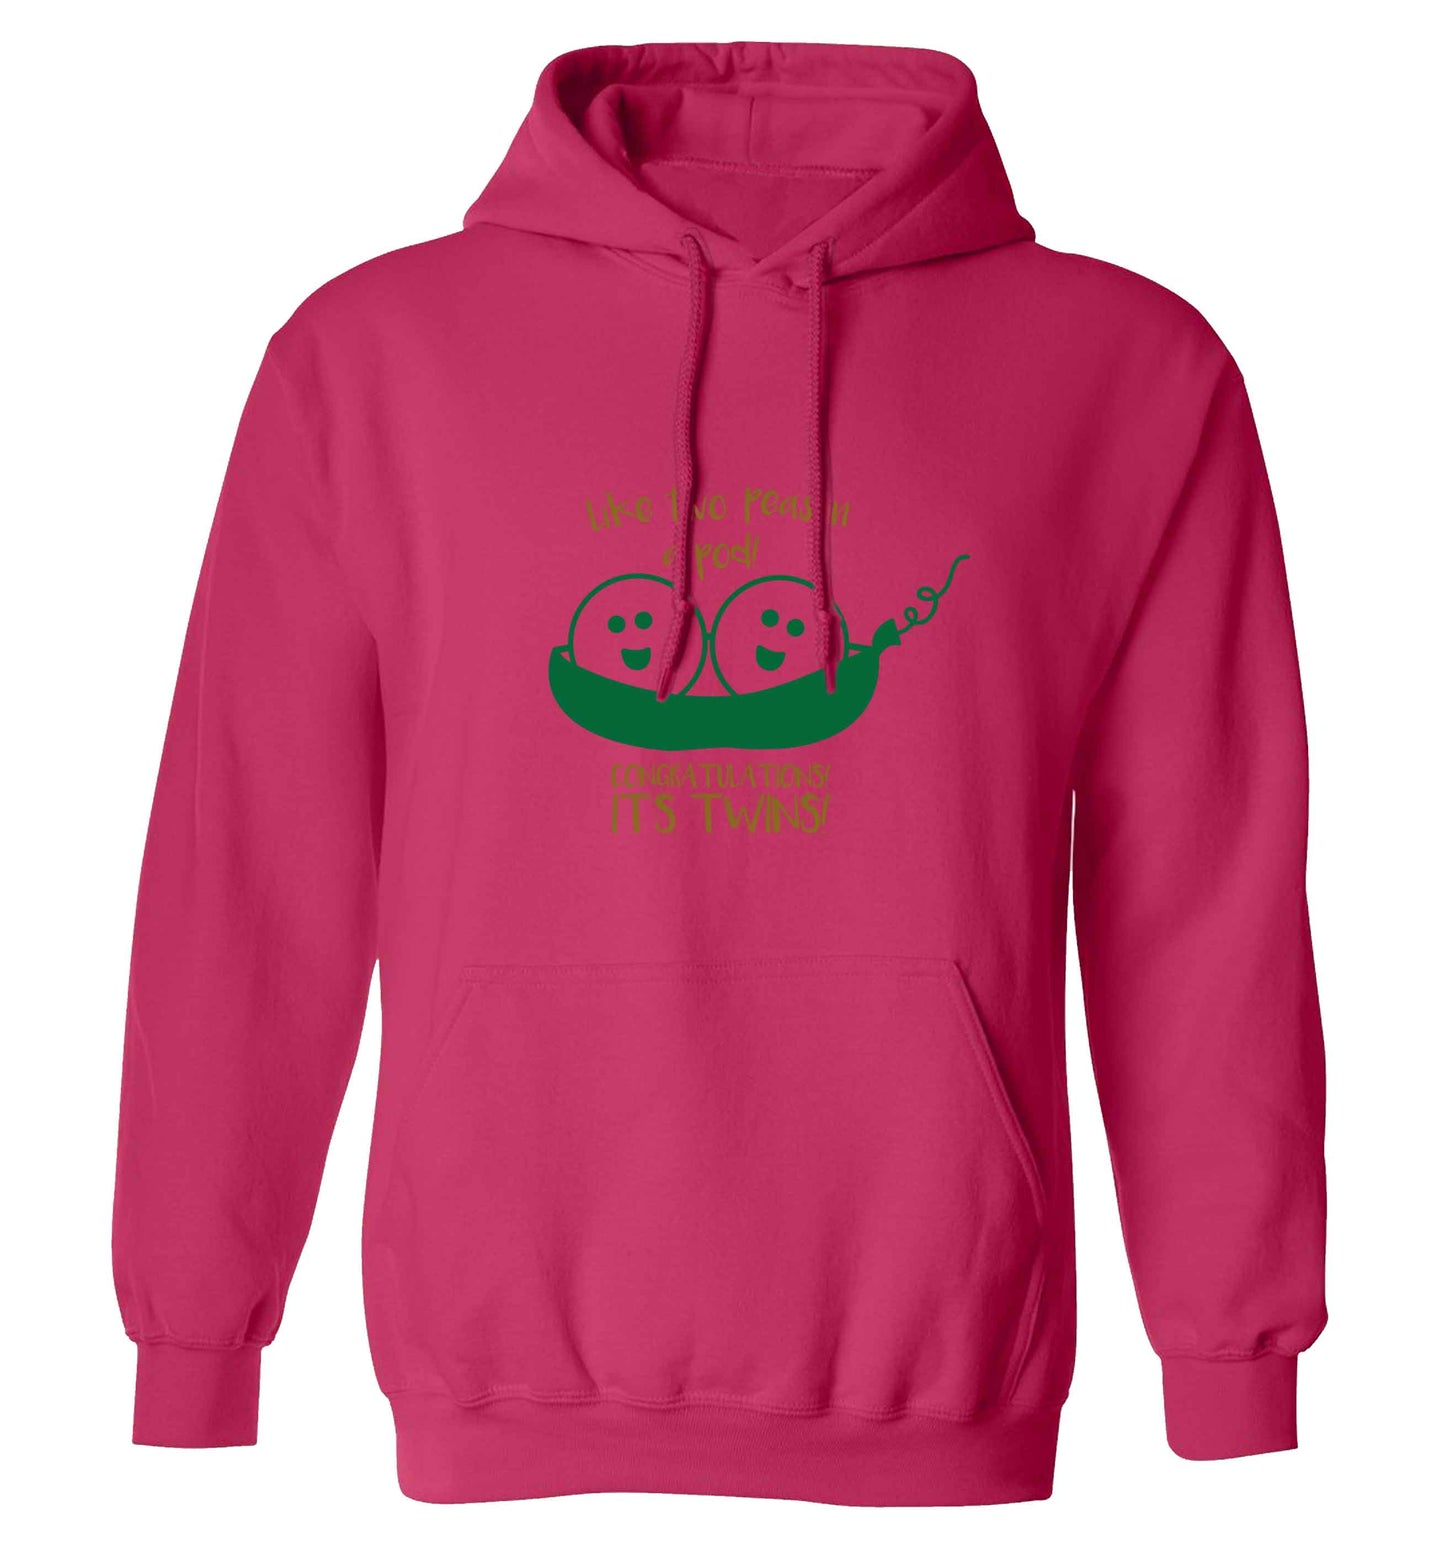 Like two peas in a pod! Congratulations it's twins! adults unisex pink hoodie 2XL